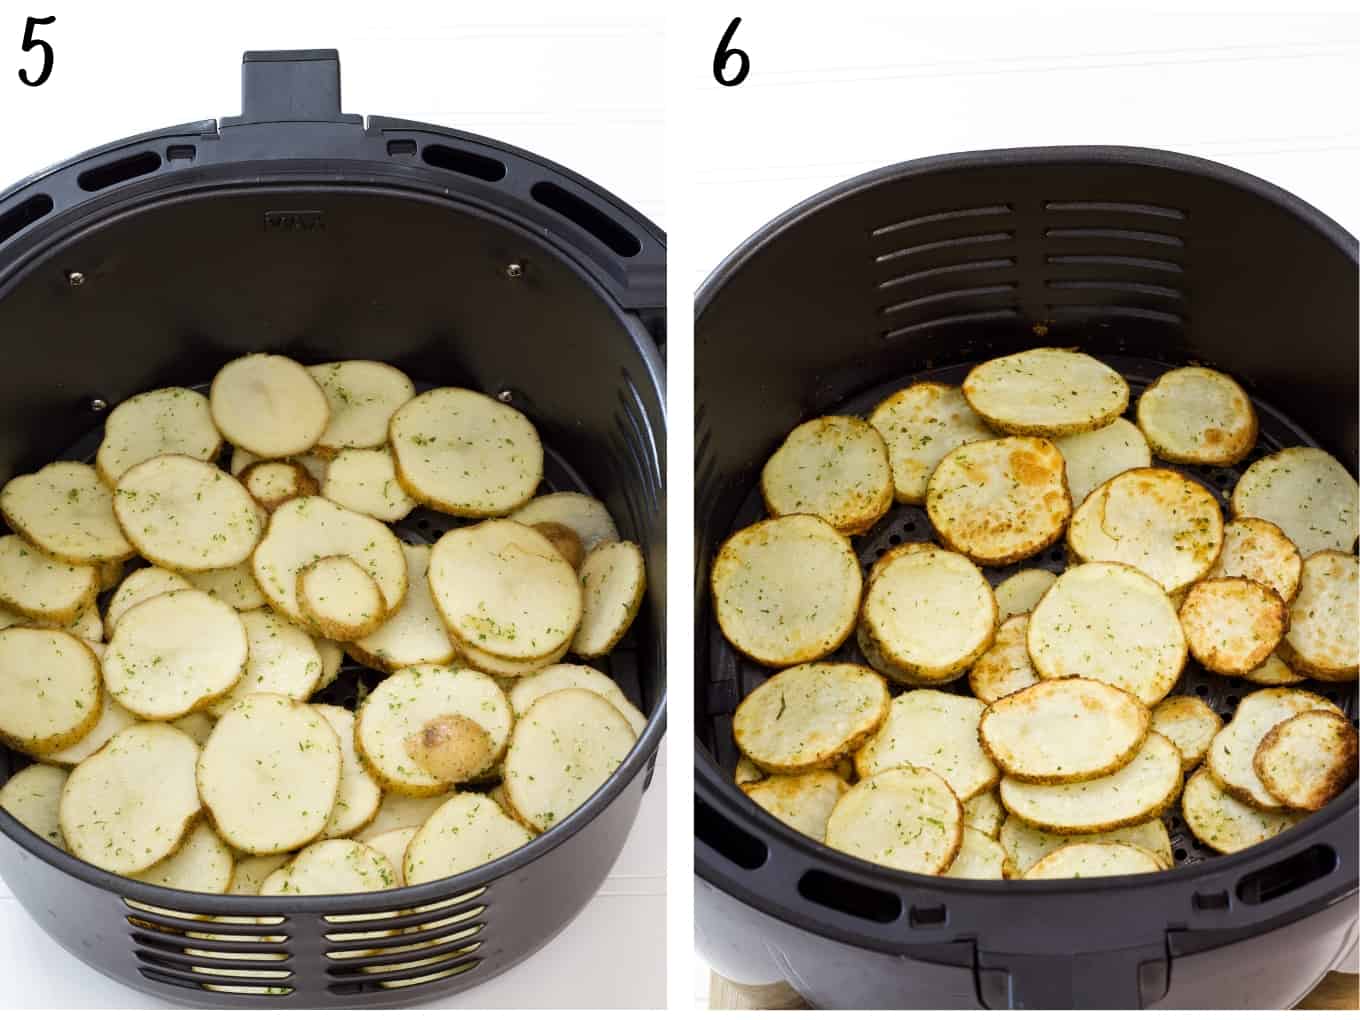 Side by side images of the potatoes in the air fryer basket, raw and cooked.